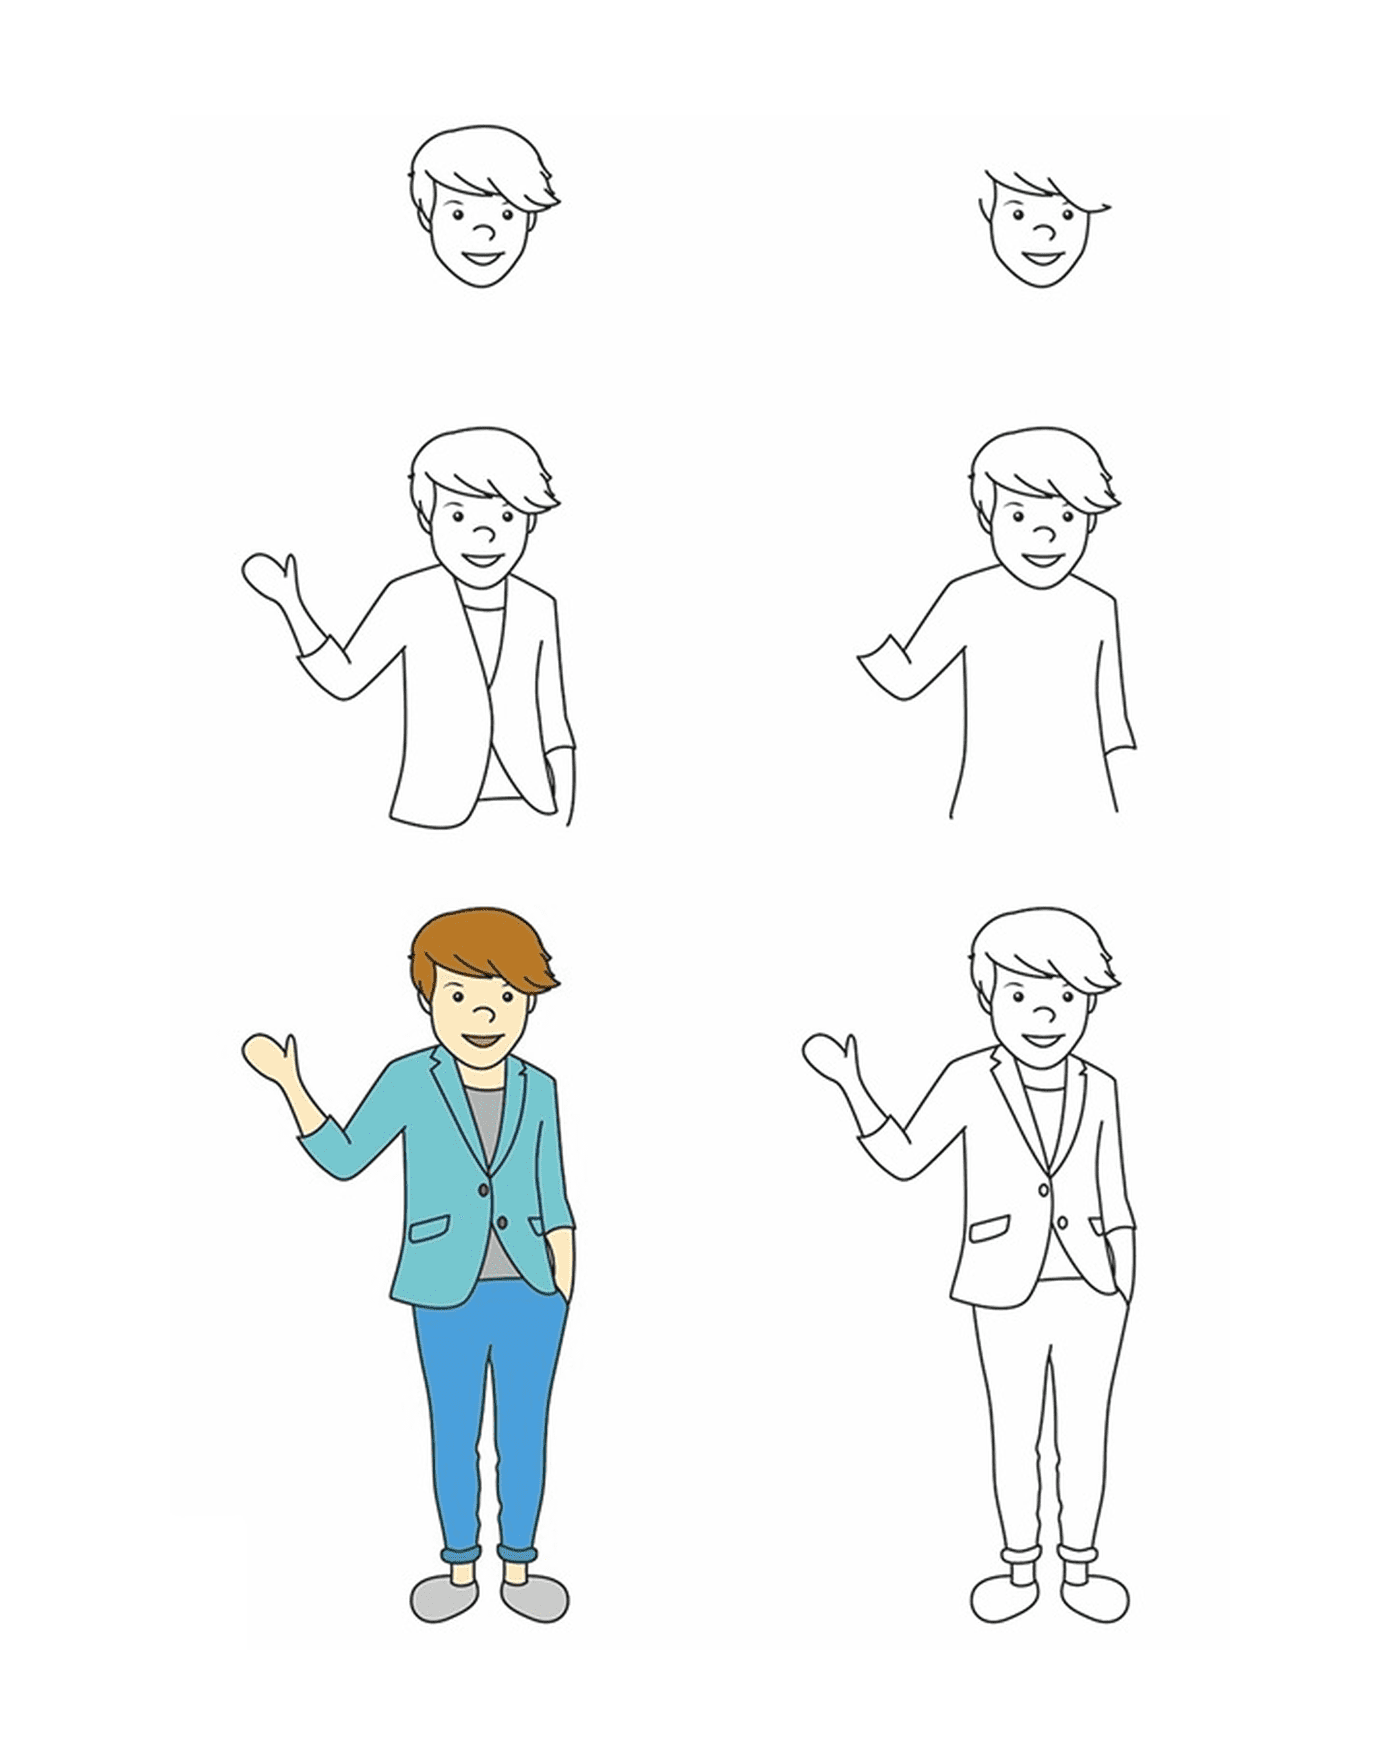  How to draw a man in different positions 